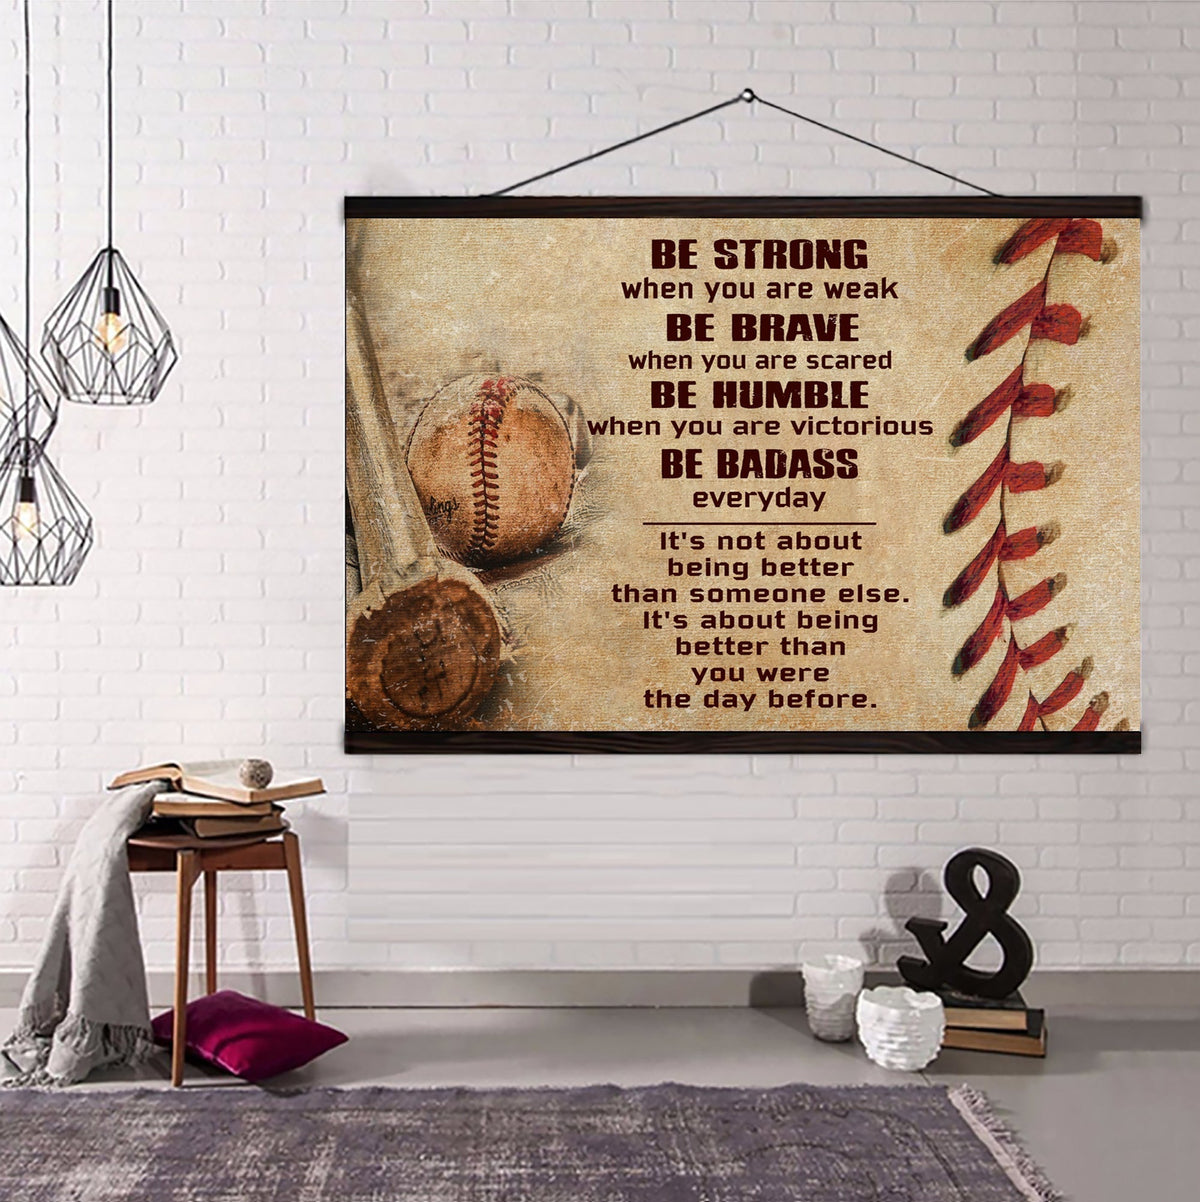 (XH1220) Baseball customizable poster canvas - It is not about better than someone else, It is about being better than you were the day before